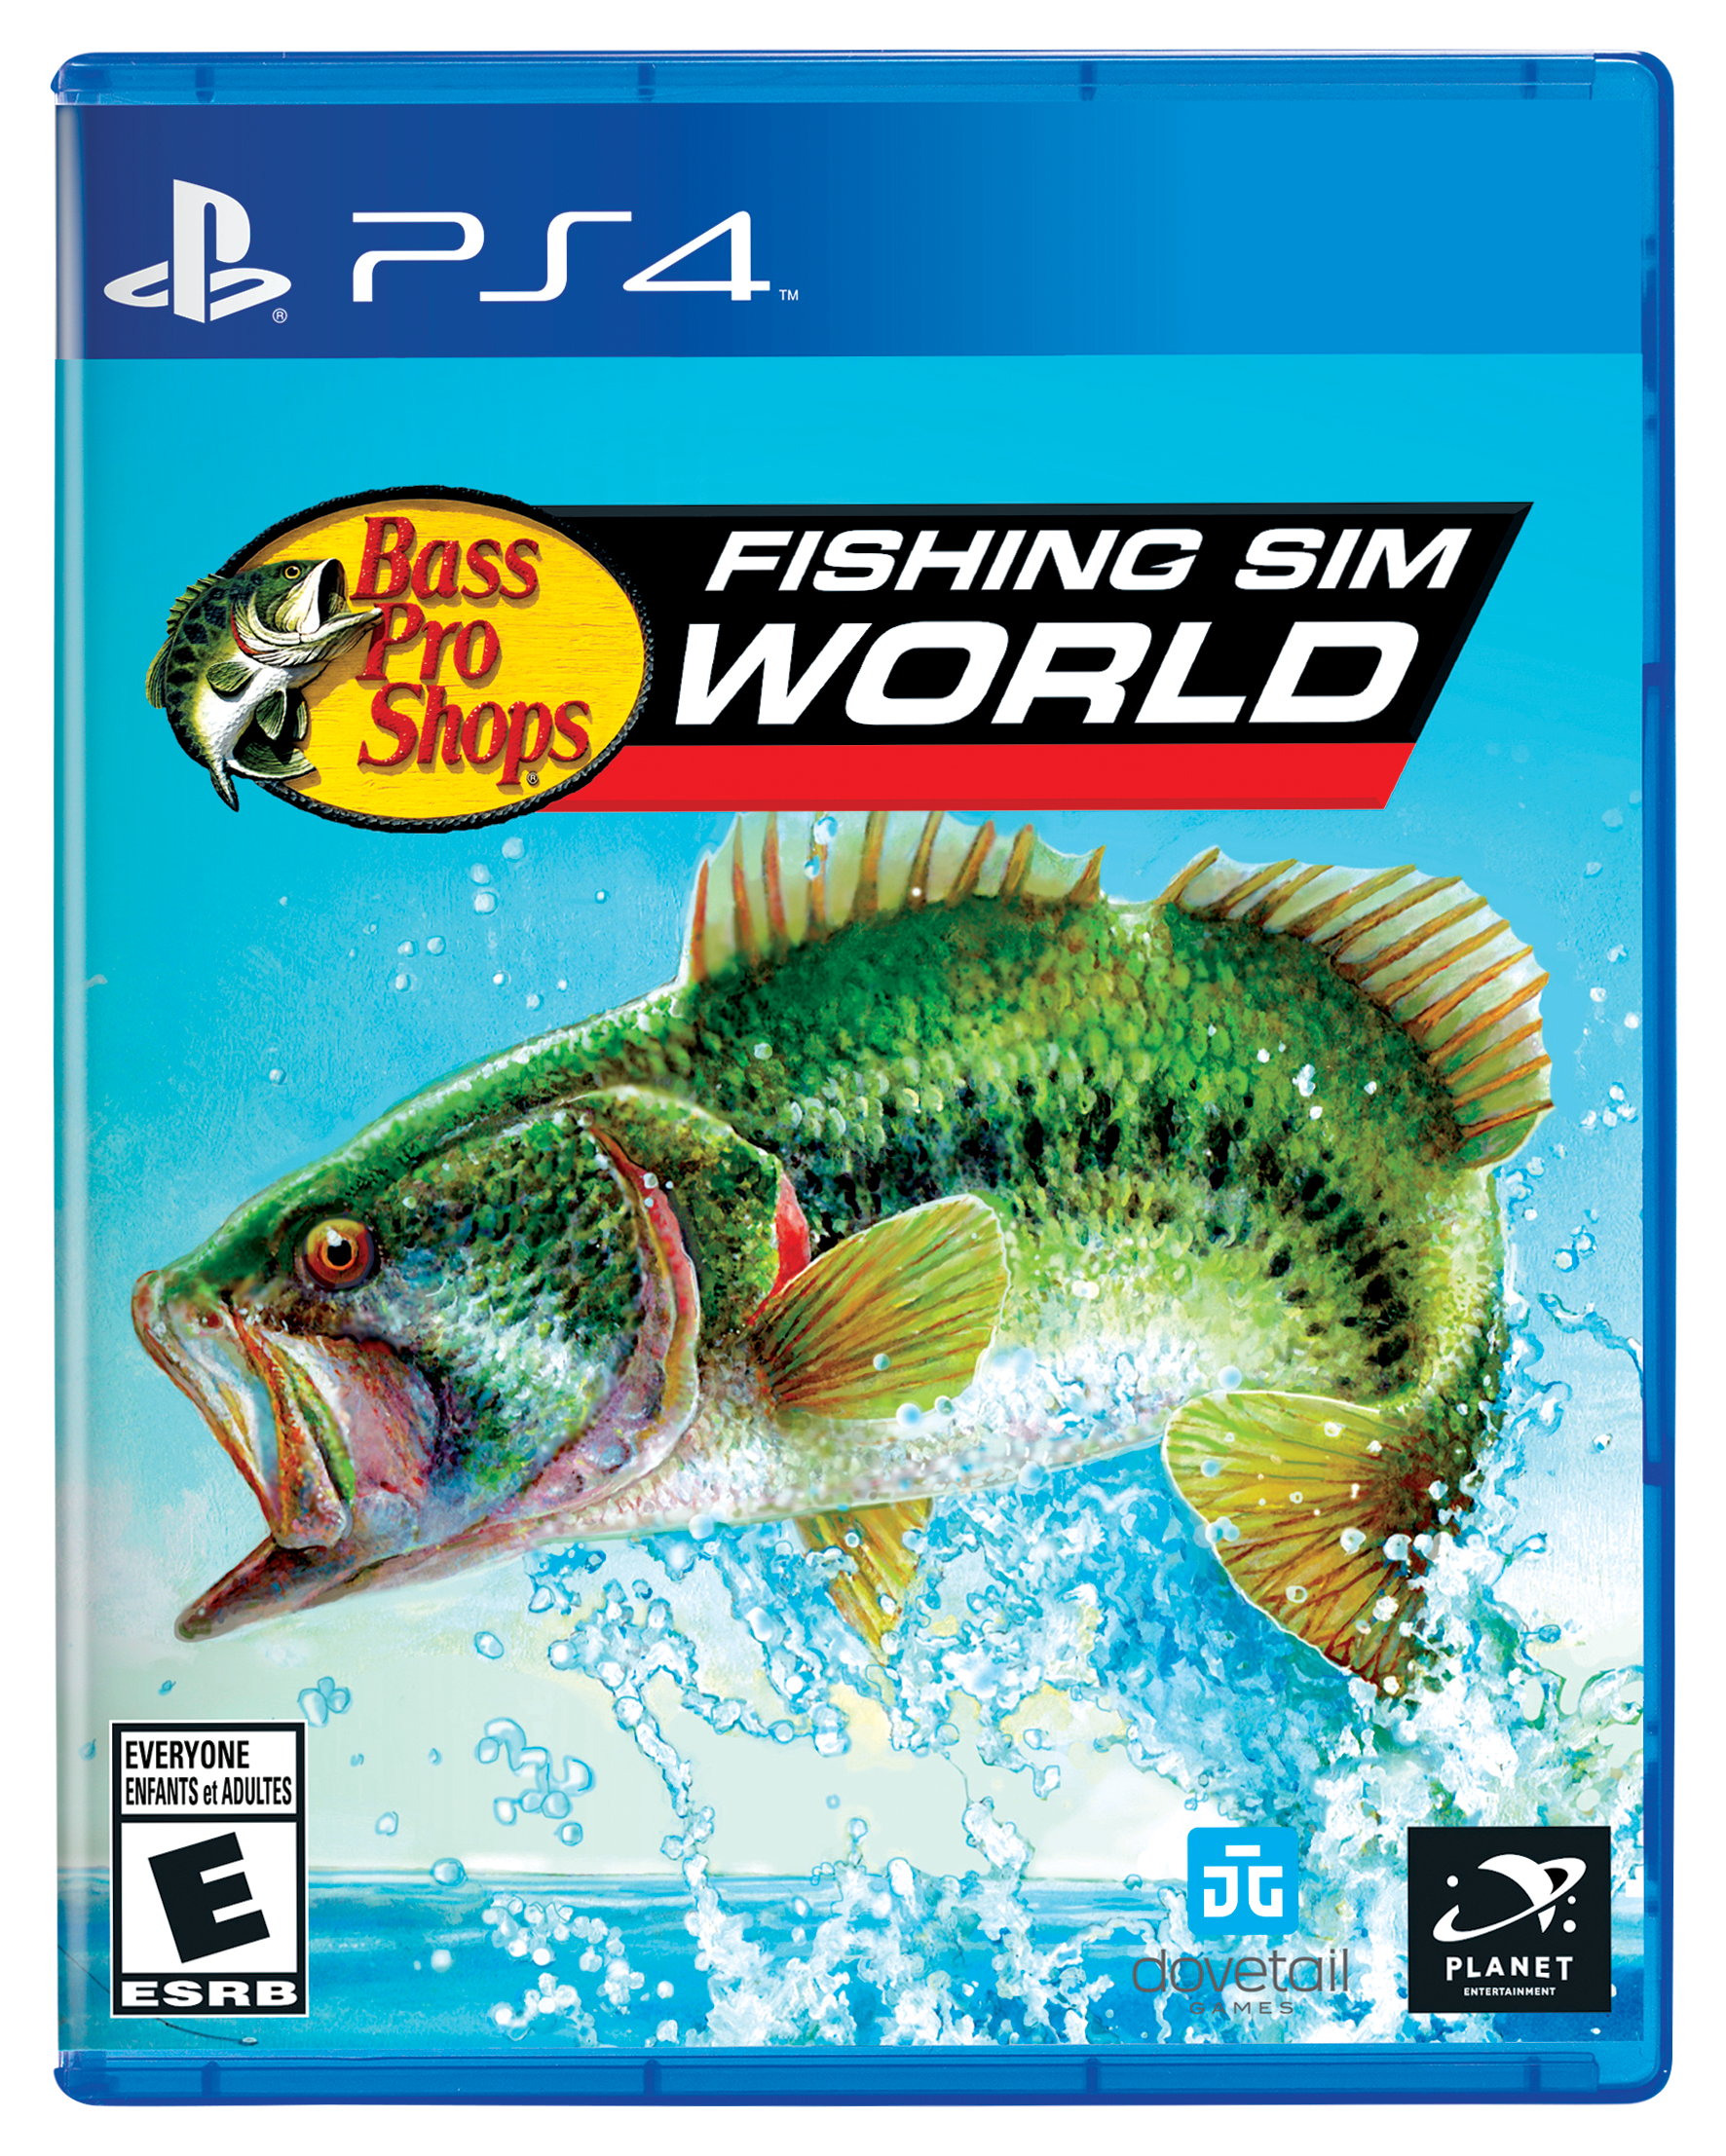 Bass Pro Shops Fishing Sim World Video Game For PlayStation, 40% OFF